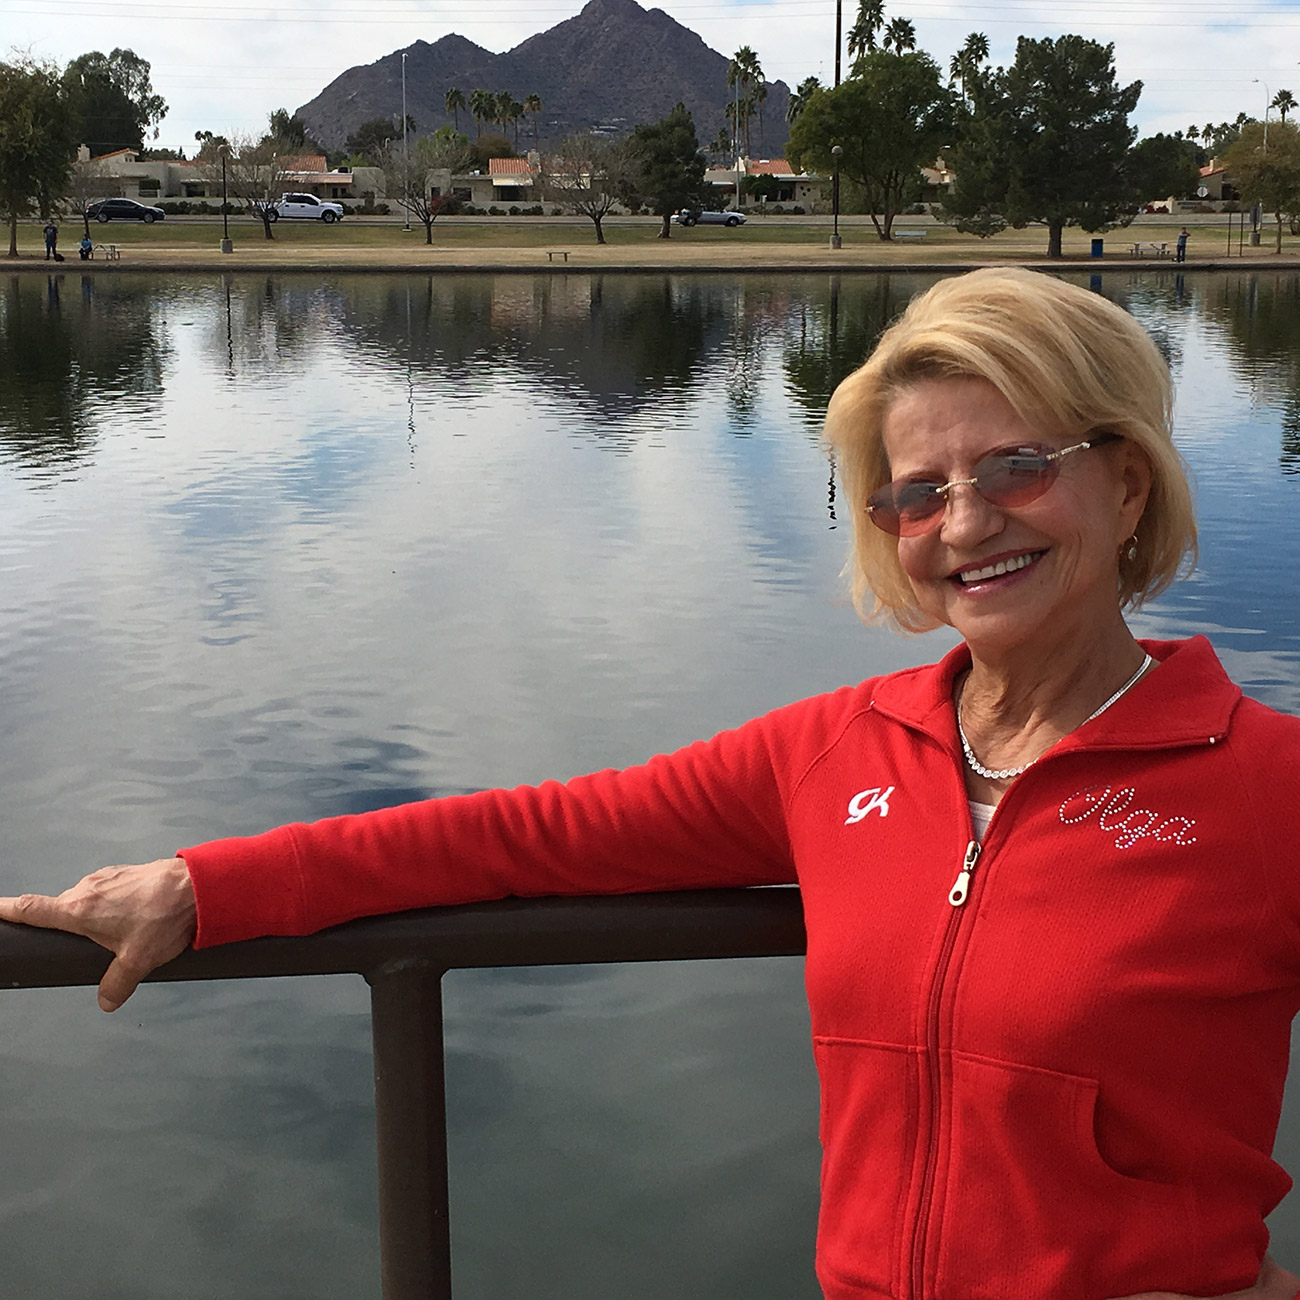 Olympic gold medal gymnast Olga Korbut, of Russia, poses in in Scottsdale, Ariz. At at 61, Korbut is at ease with her place in history as she enjoys the quiet life in Arizona, 2017.  / AP